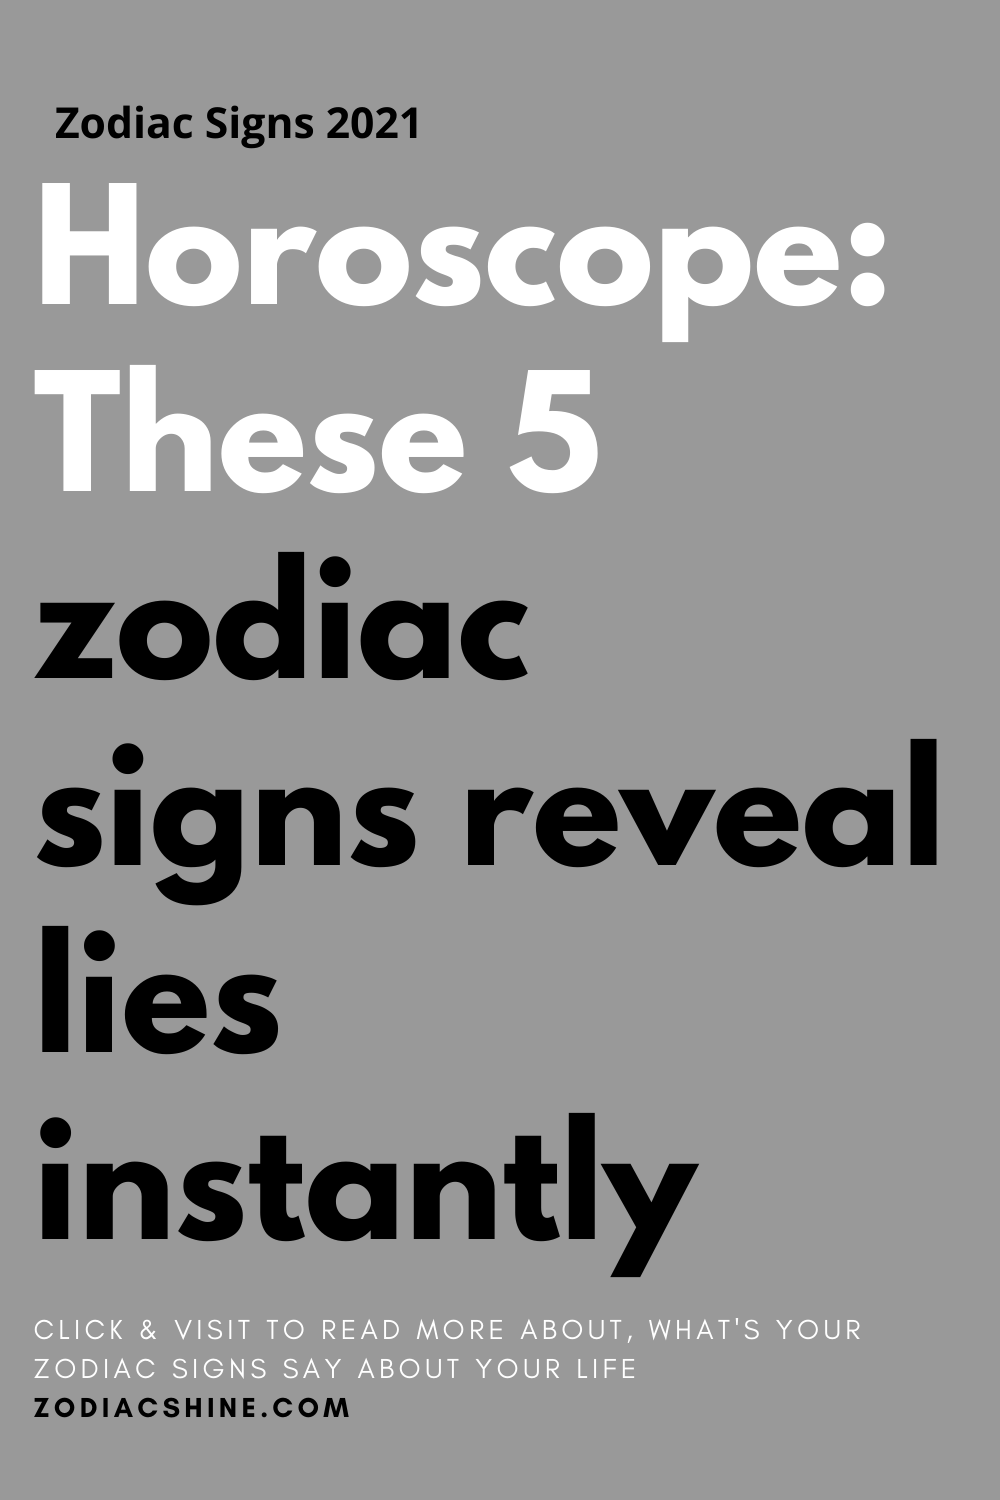 Horoscope: These 5 zodiac signs reveal lies instantly